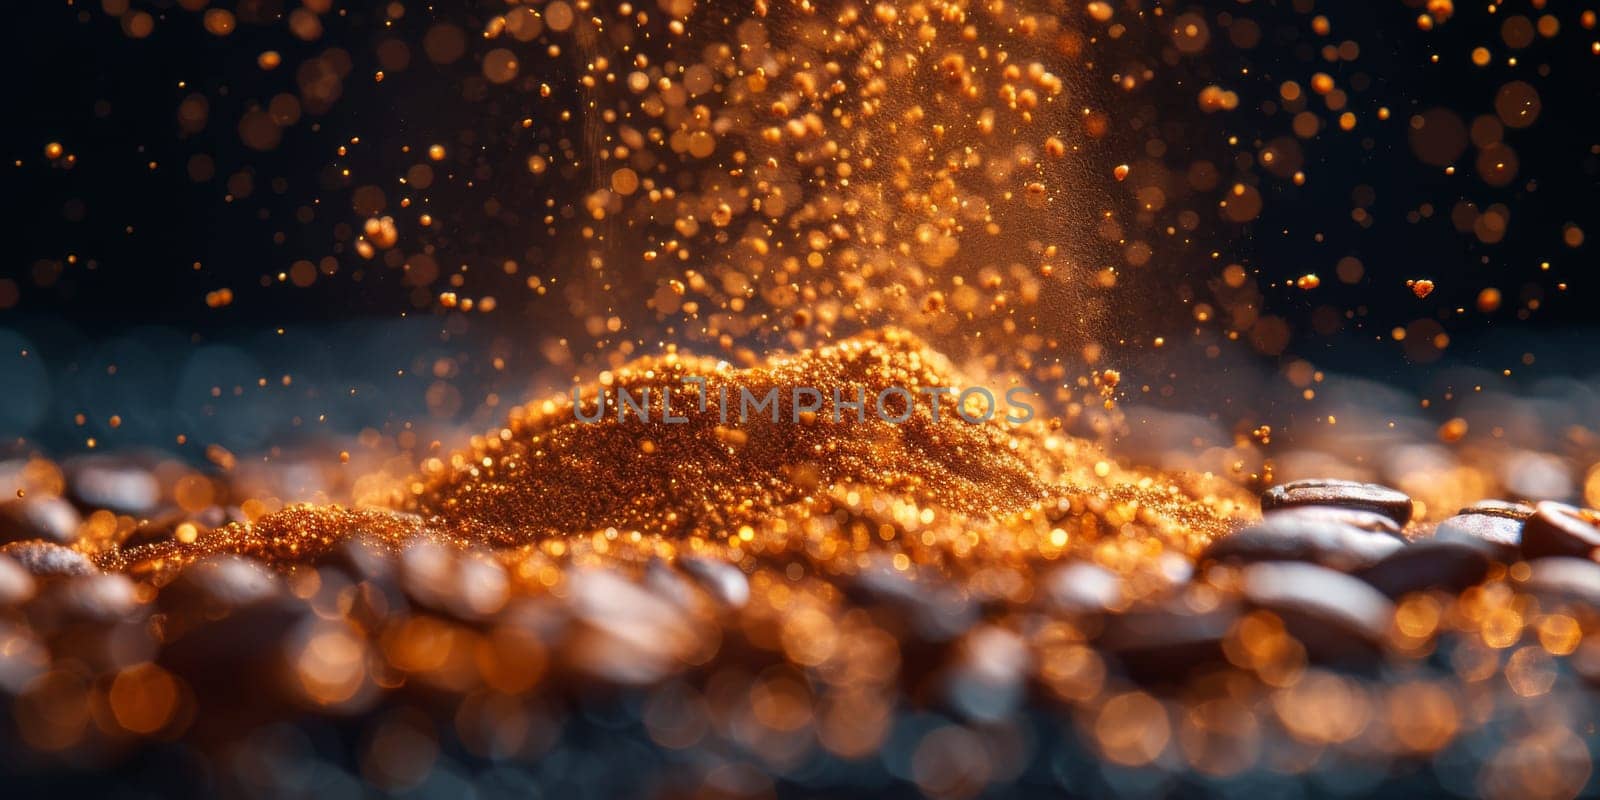 Extreme macro photography of fresh roasted coffee beans ground. by Benzoix